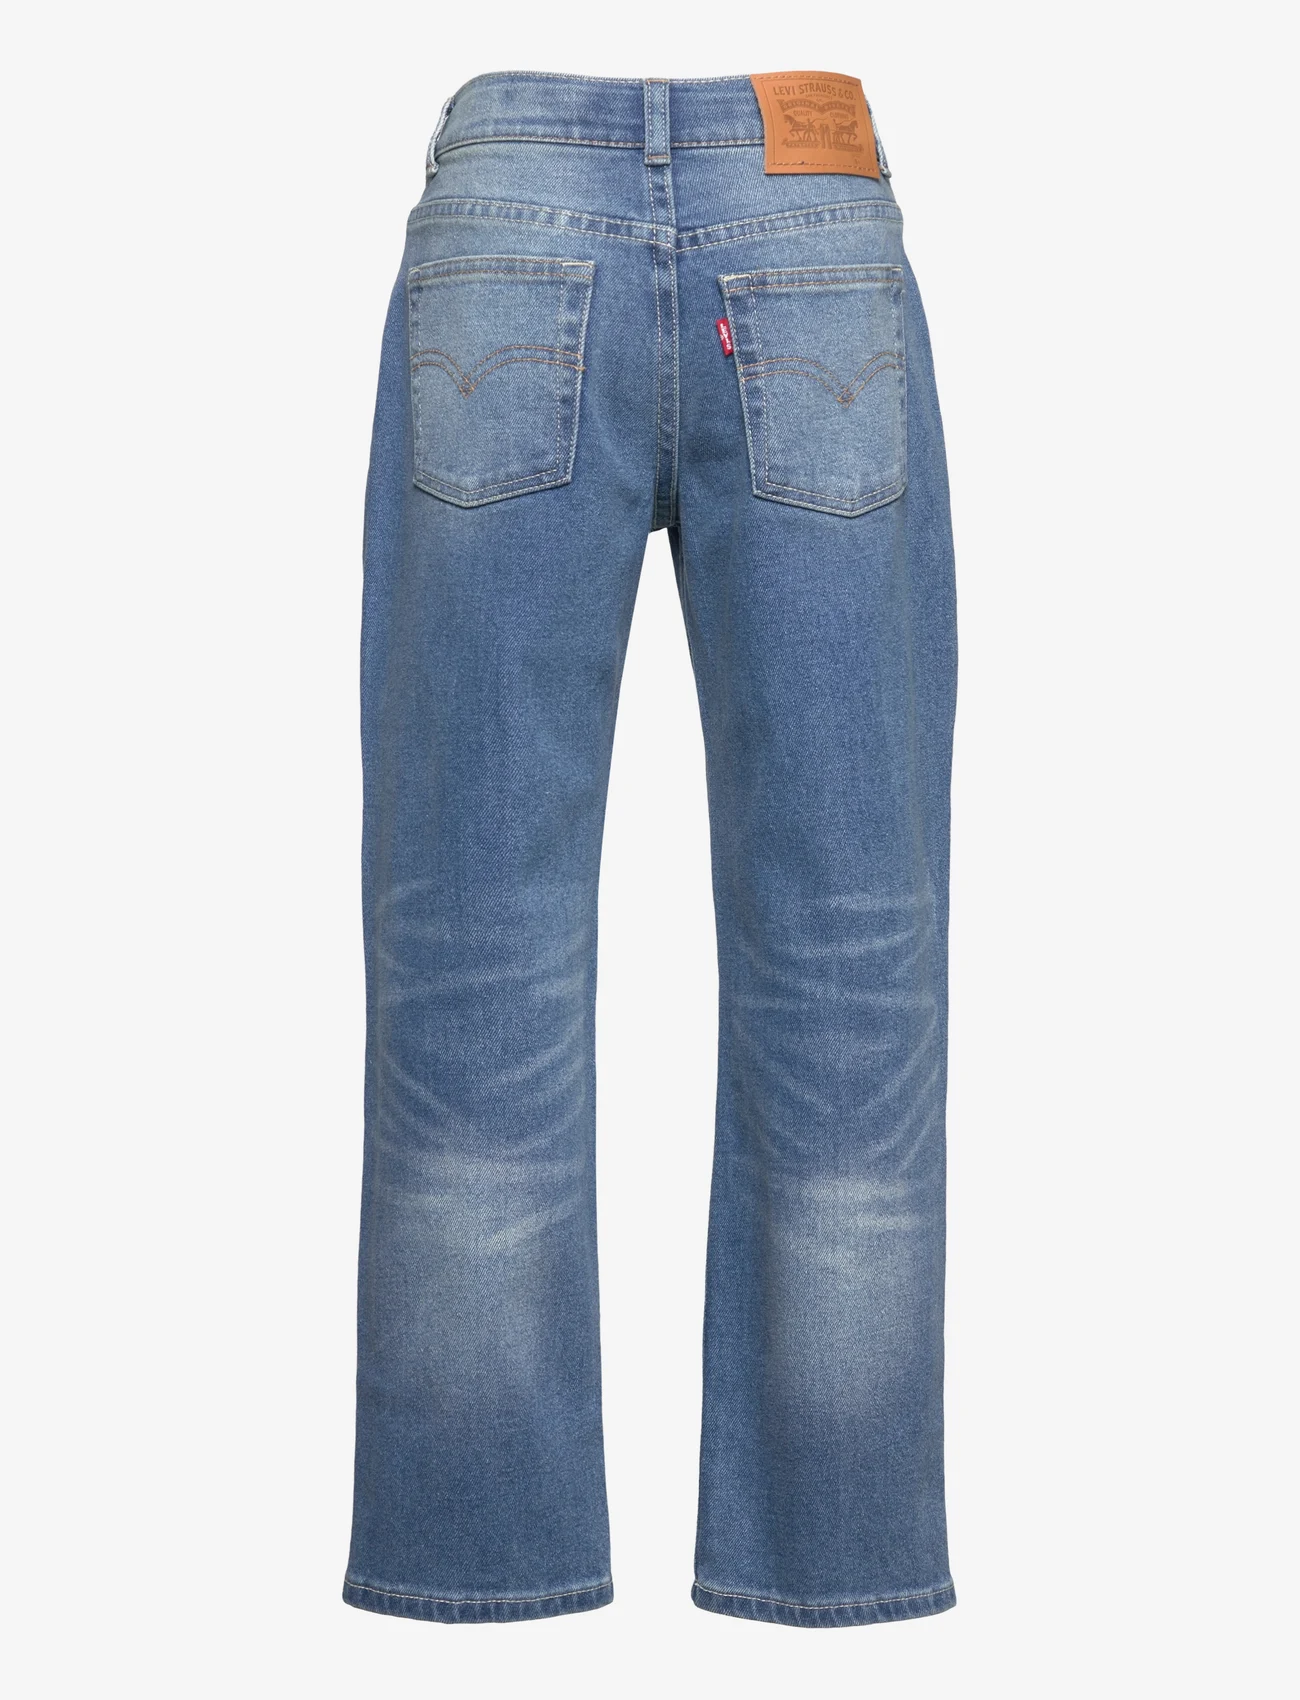 Levi's - Levi's® Stay Baggy Tapered Jeans - loose jeans - blue - 1